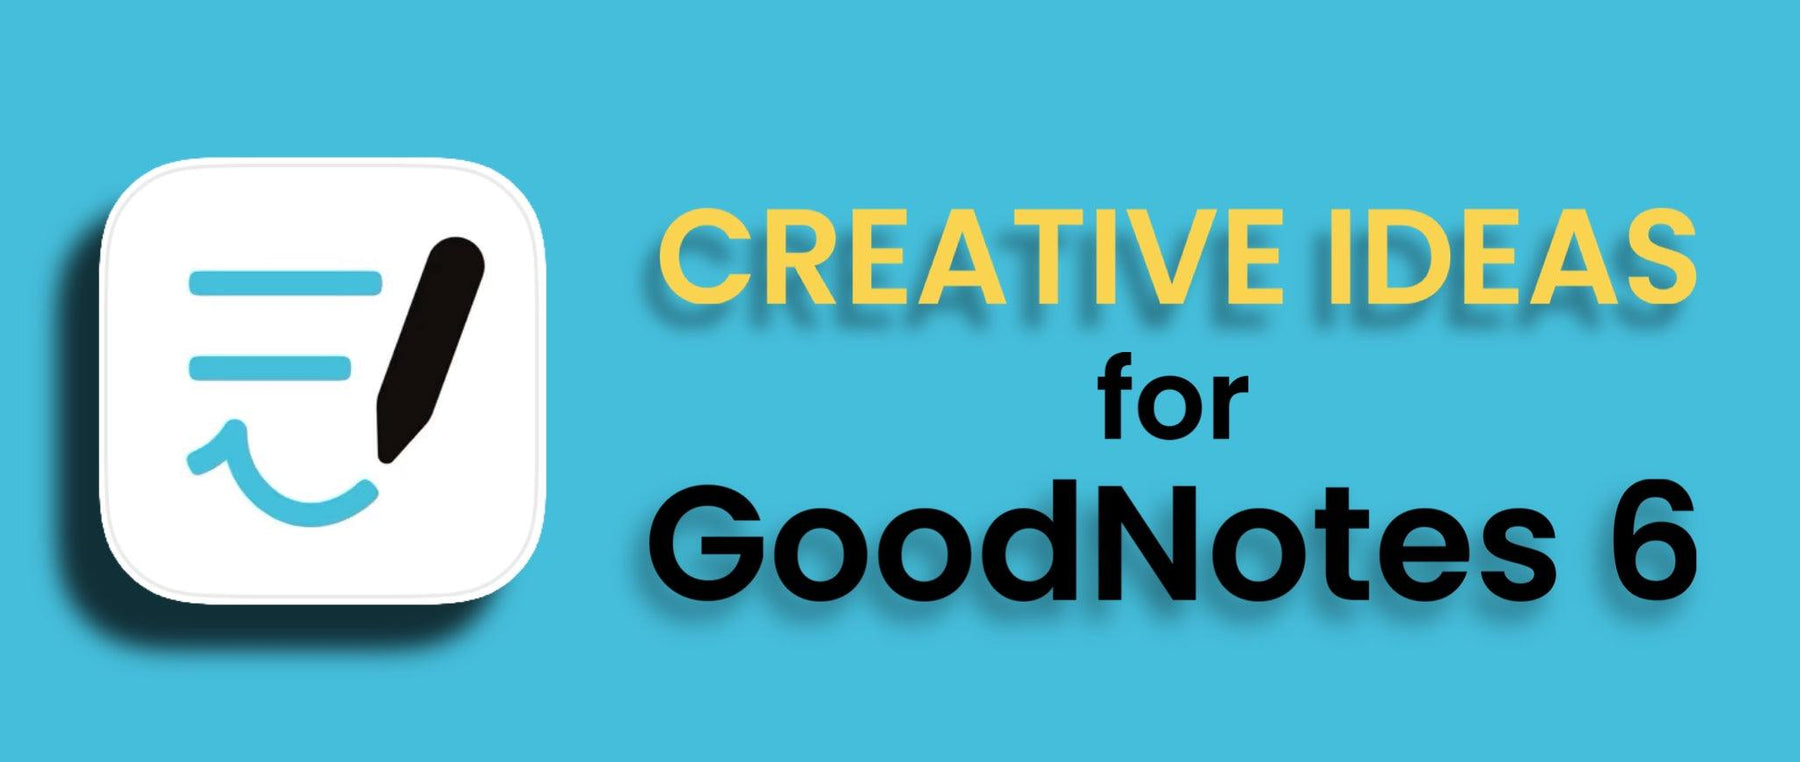 Unlocking the Creative Potential of GoodNotes 6 for Digital Planning